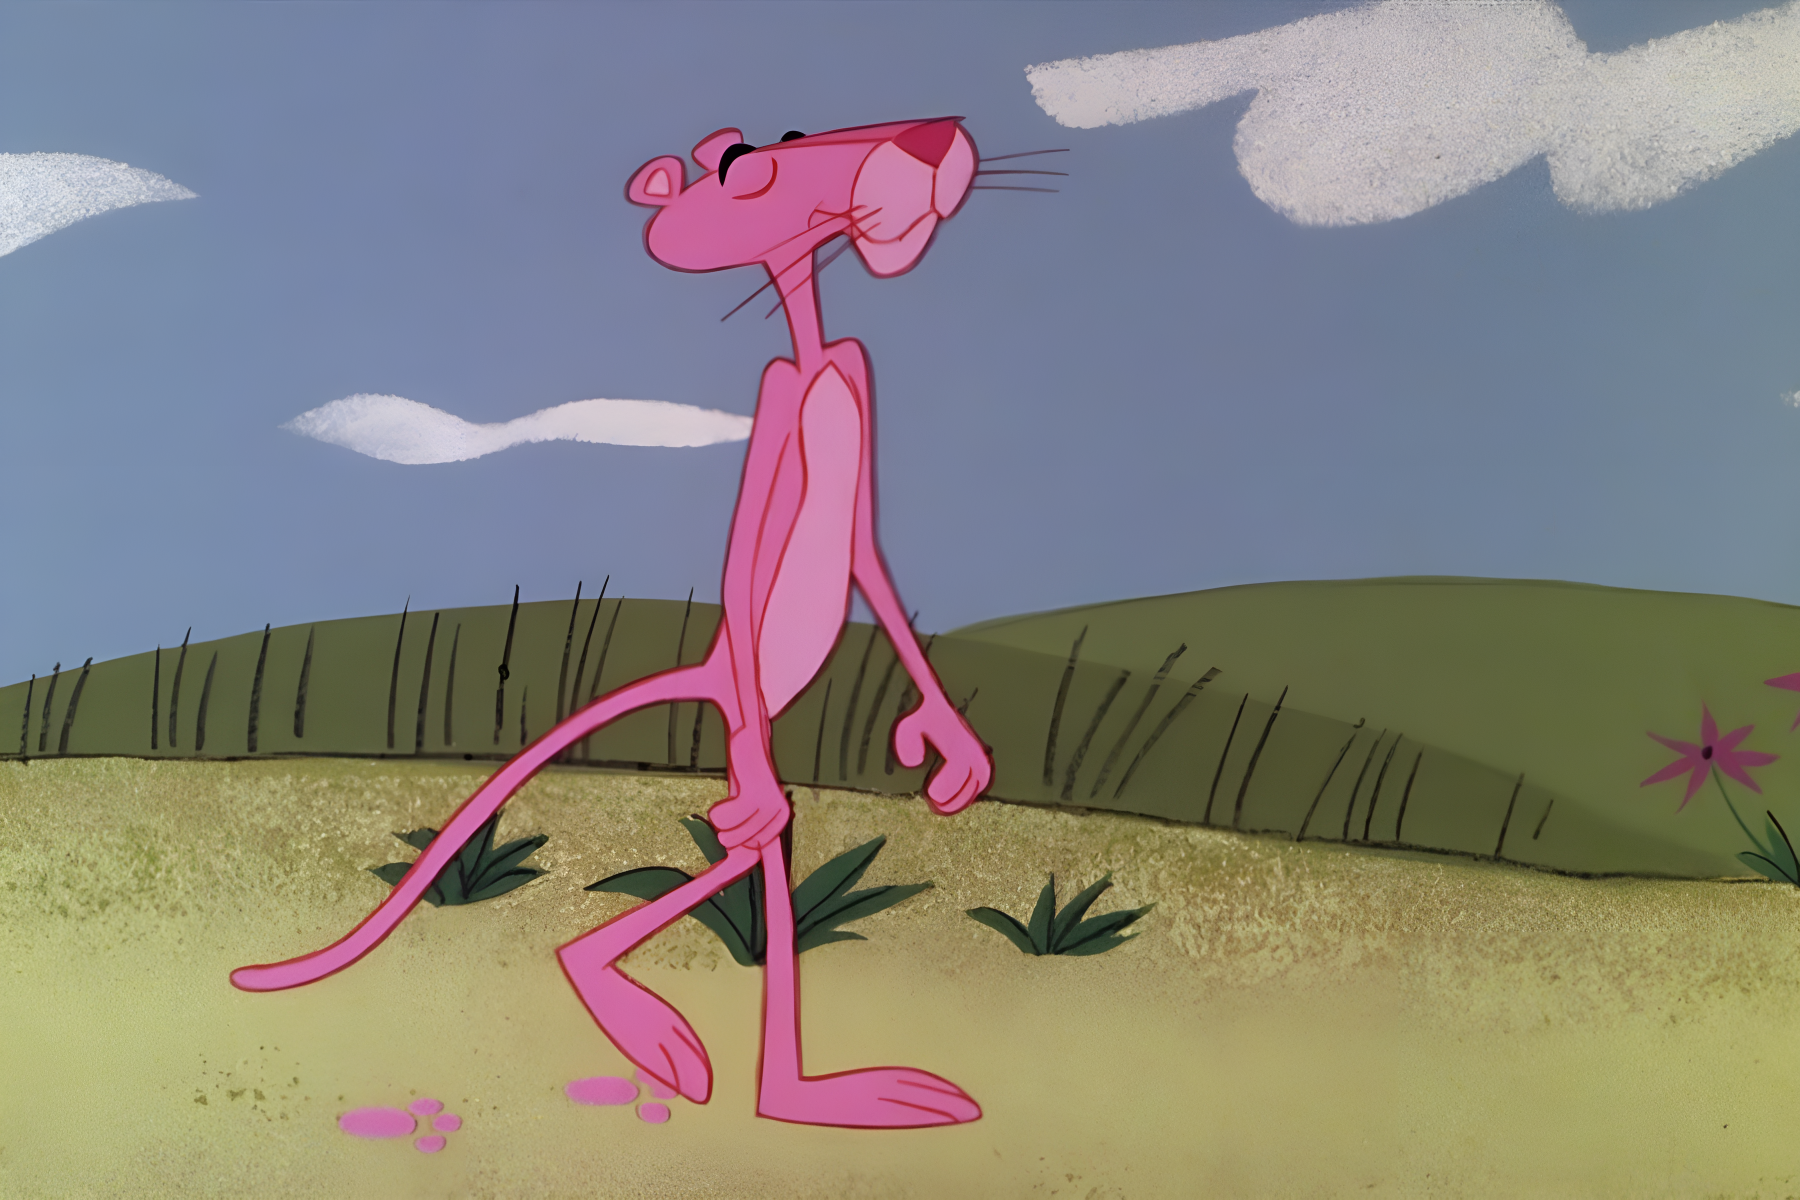 Pink Panther is walking on a bare land